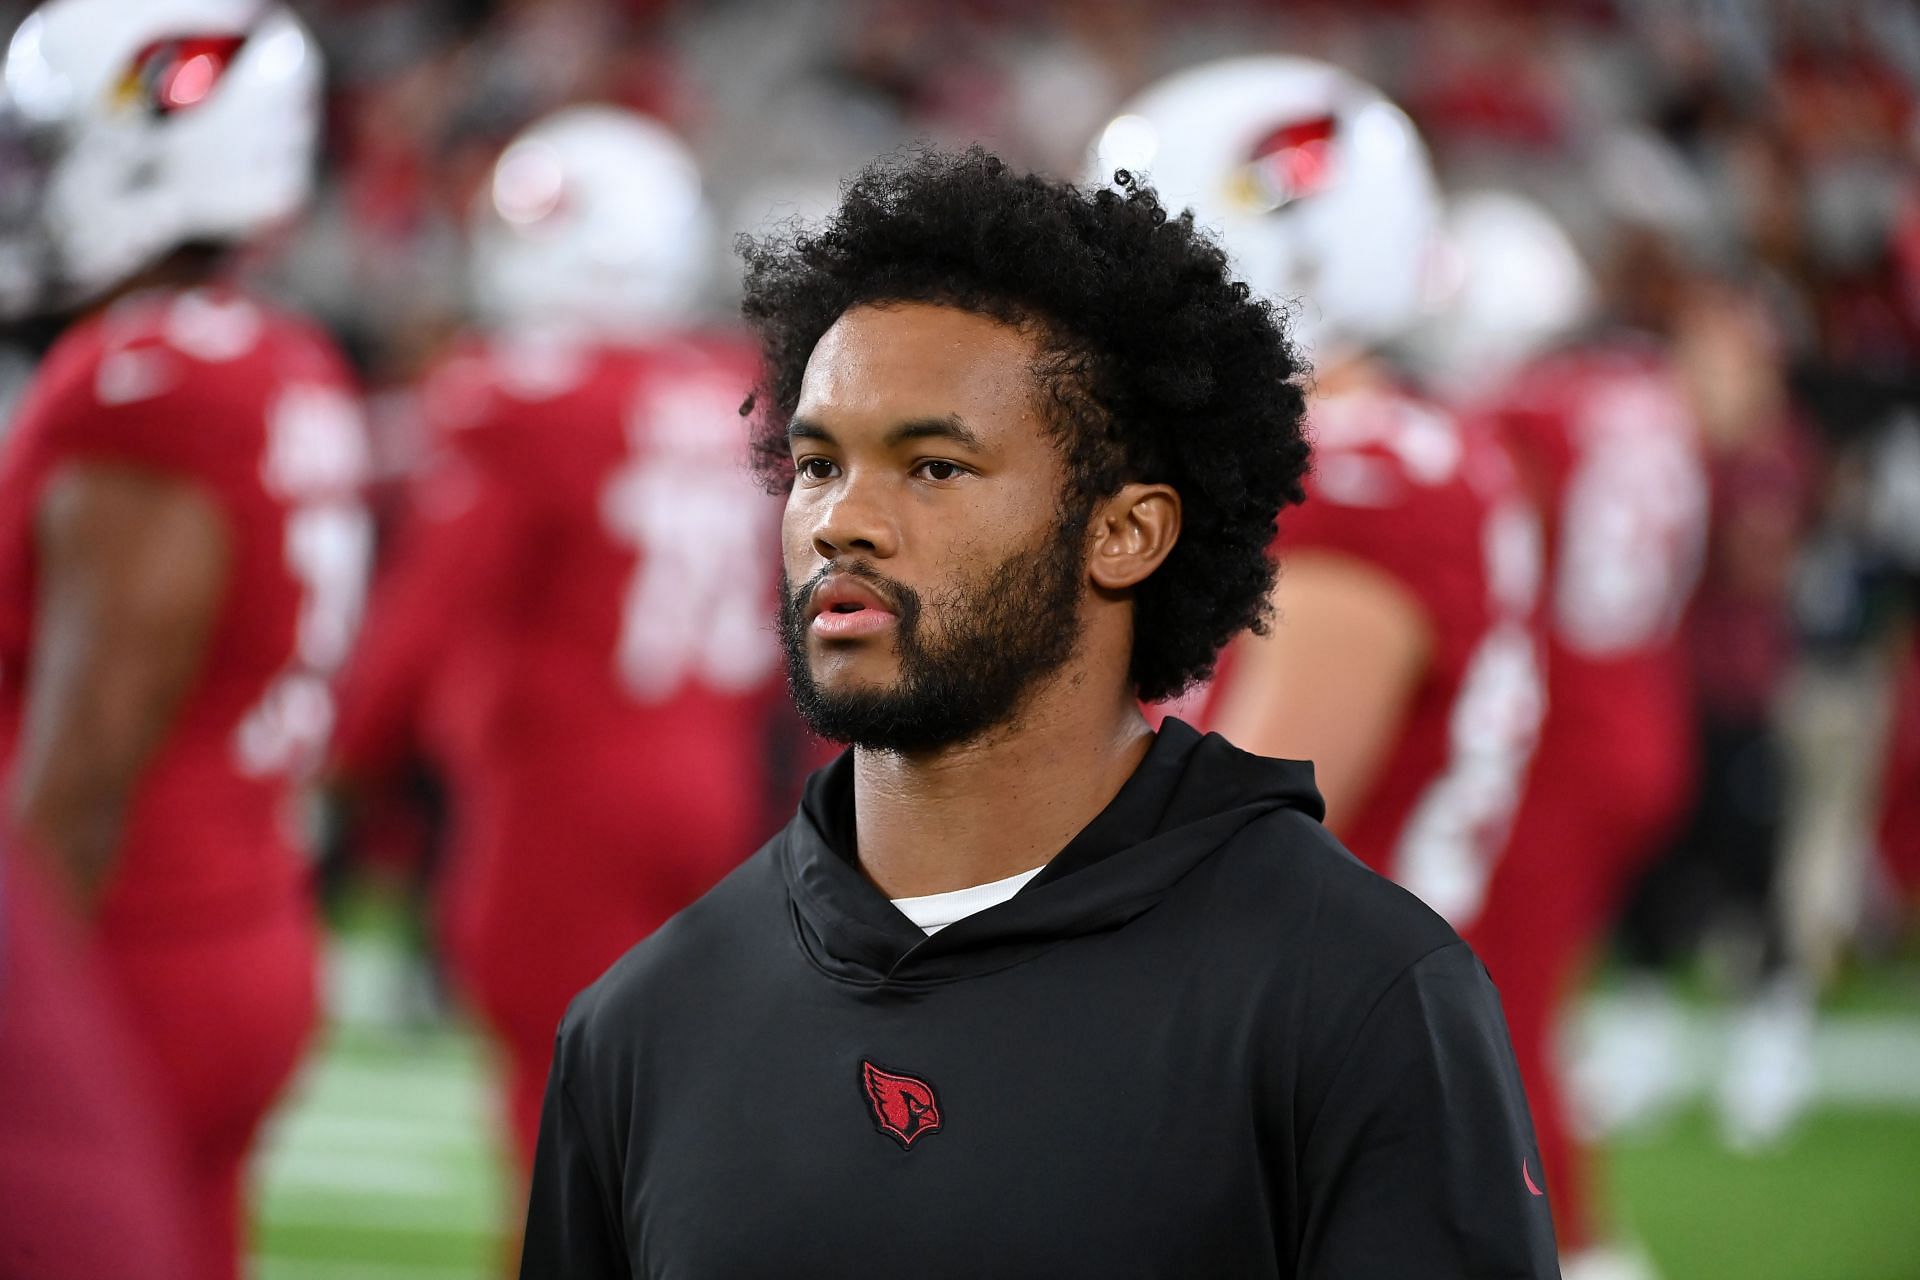 Football or baseball? Kyler Murray faces the big question now